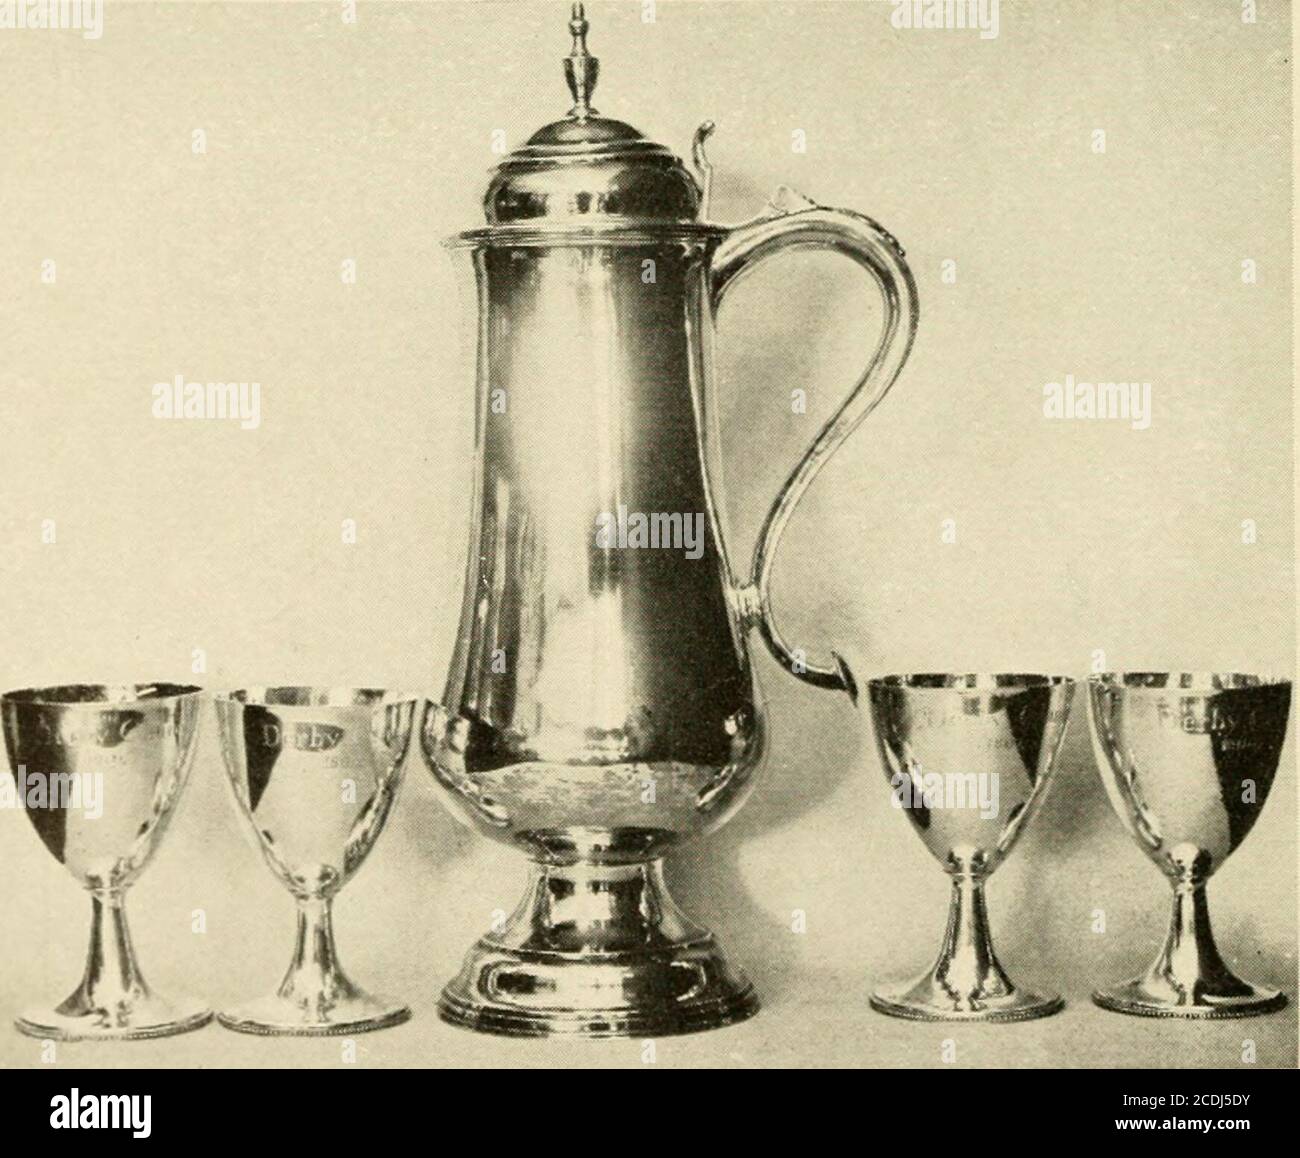 . Early silver of Connecticut and its makers . Made by Timothy Bontecou. Height SY2 inches. Owned byMrs. Oliver Swan, Meriden. Mark: T. B. incised. Plate of the First Congregational Church, Derby Flagon, height 17:!i inches. Made by Ebenezer Chittenden. Chalices, height 5% inches. Made by Miles Gorham, 1804 v.  E. Chittenden in rectangle I M. G. in rectangle Plate xvii. EARLY SILVER OF CONNECTICUT AND ITS MAKERS ony, was evidently quite a centre of silver-smithing. The map of 1748 shows thatTimothy Bontecou, also of Huguenot de-scent, was located on the west side of FleetStreet, which ran fro Stock Photo